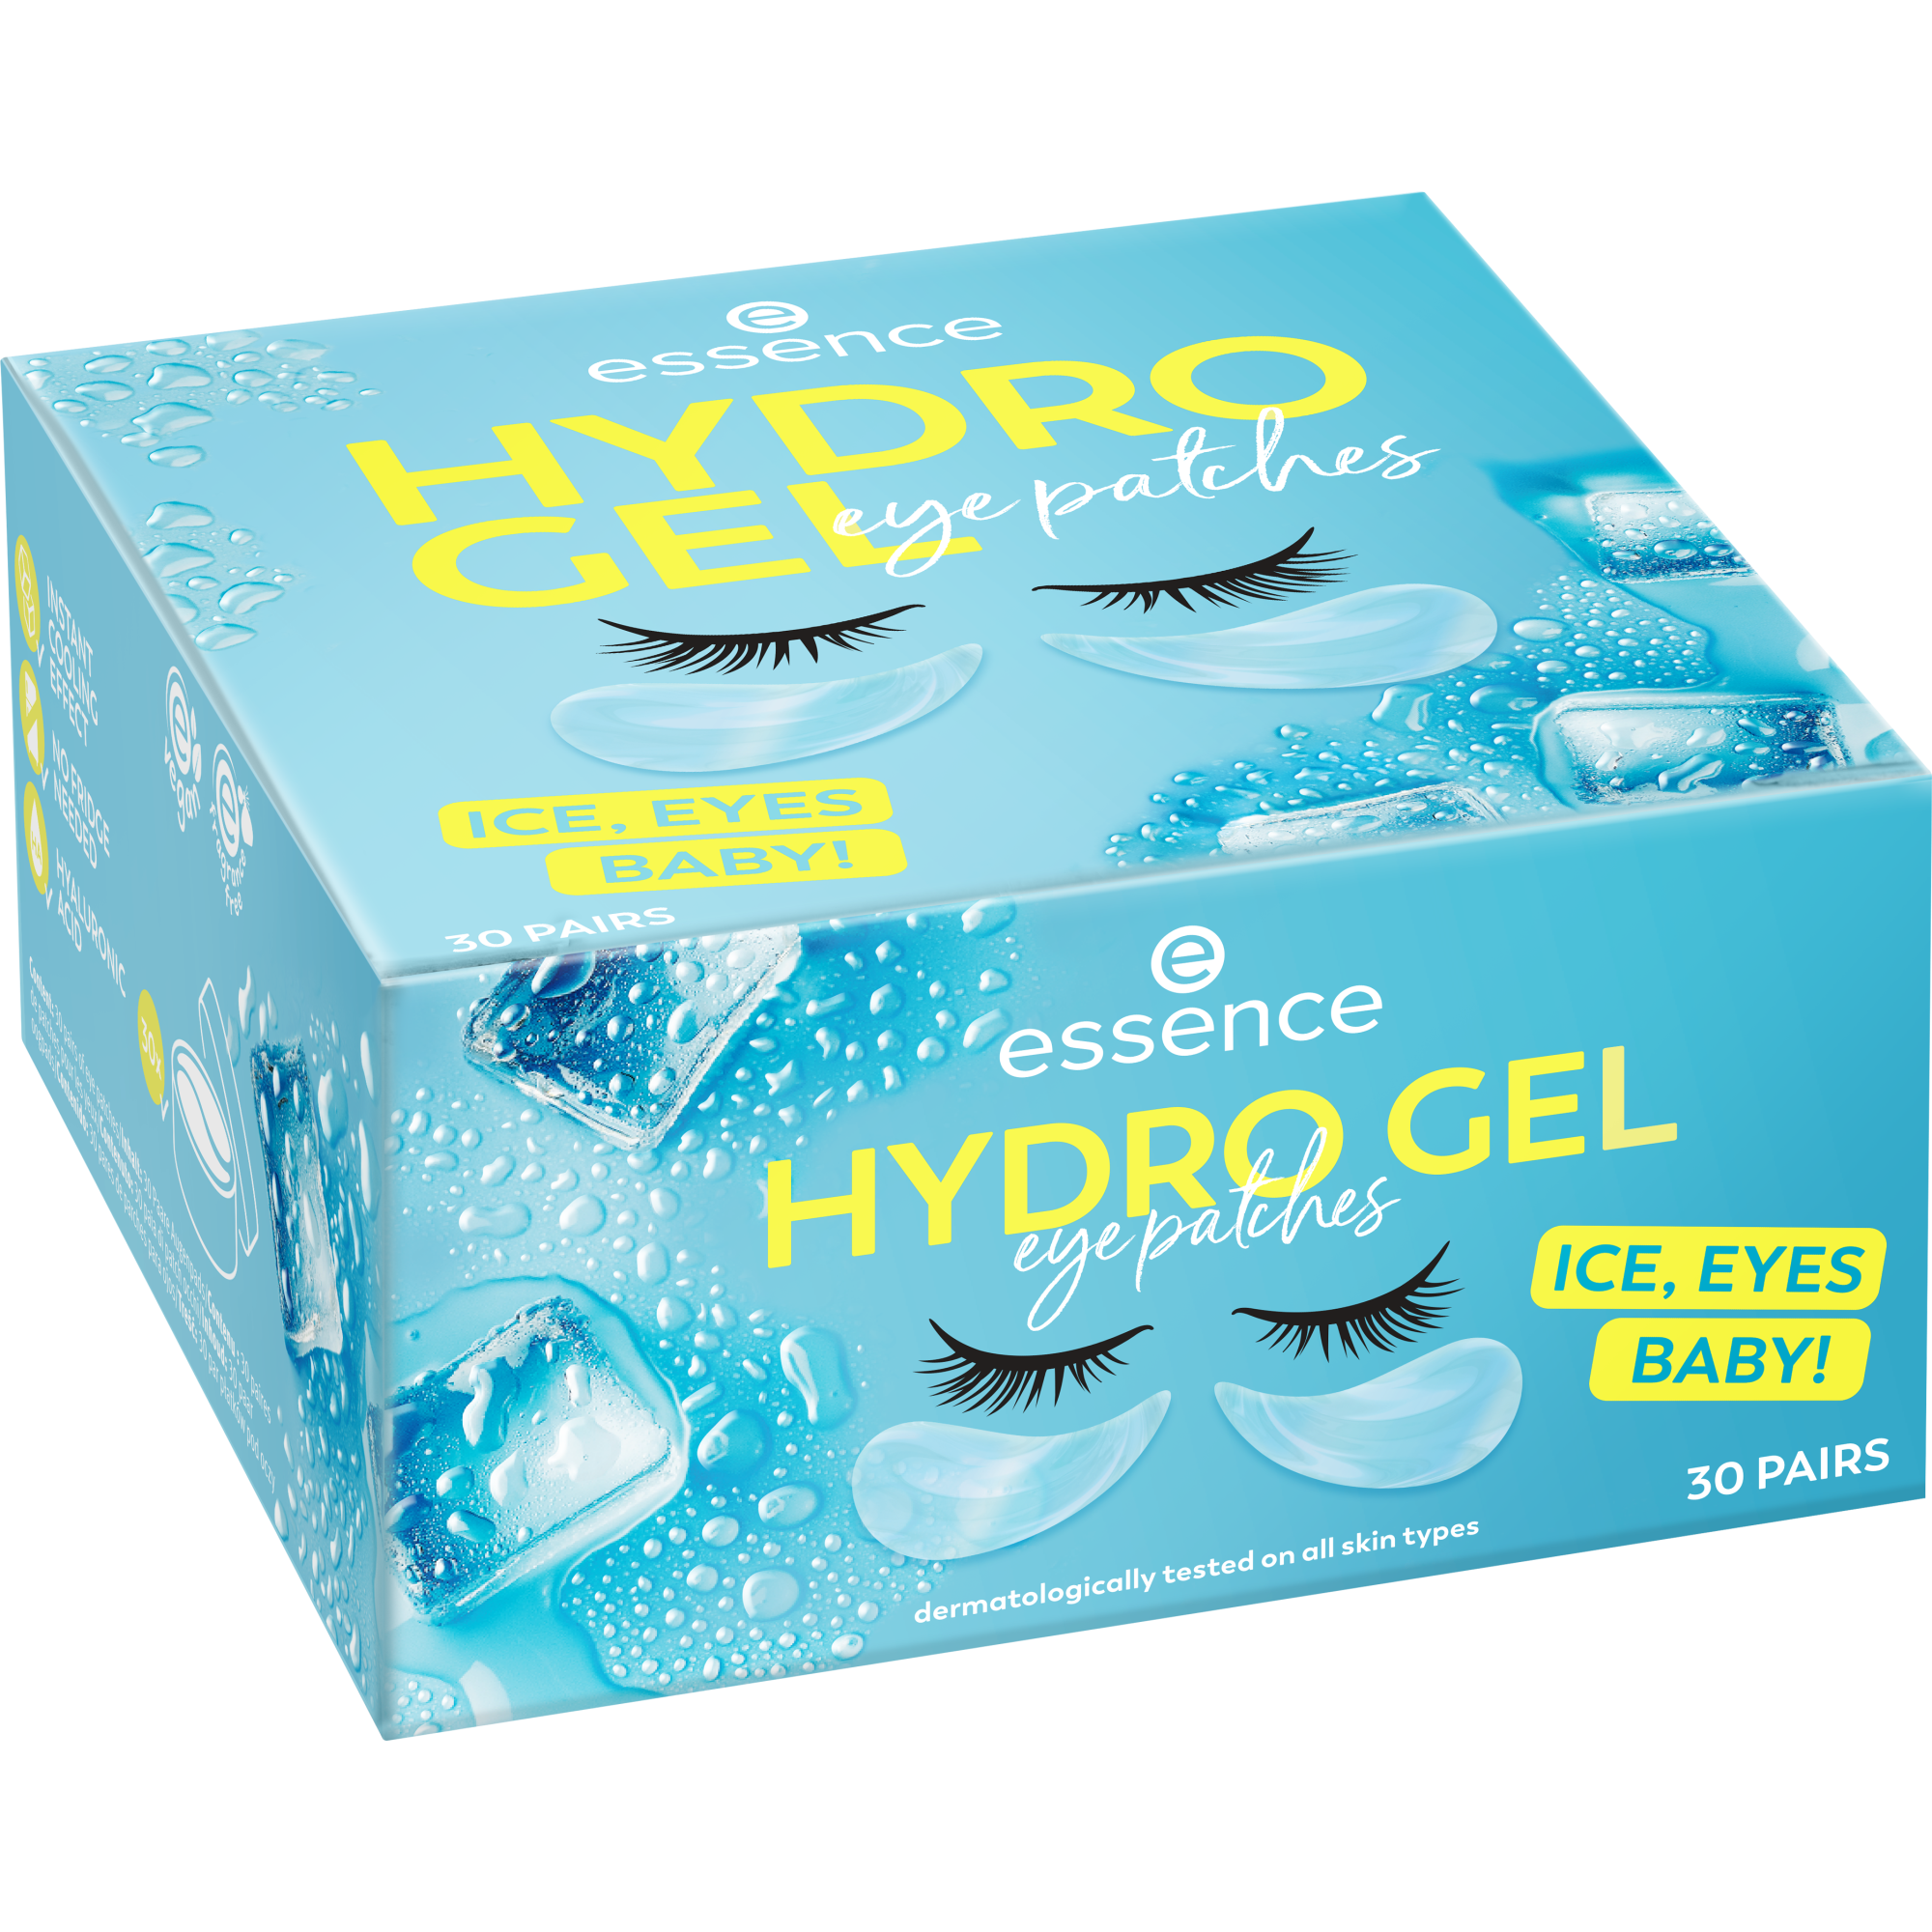 HYDRO GEL eye patches ICE, EYES, baby! 30 Pairs